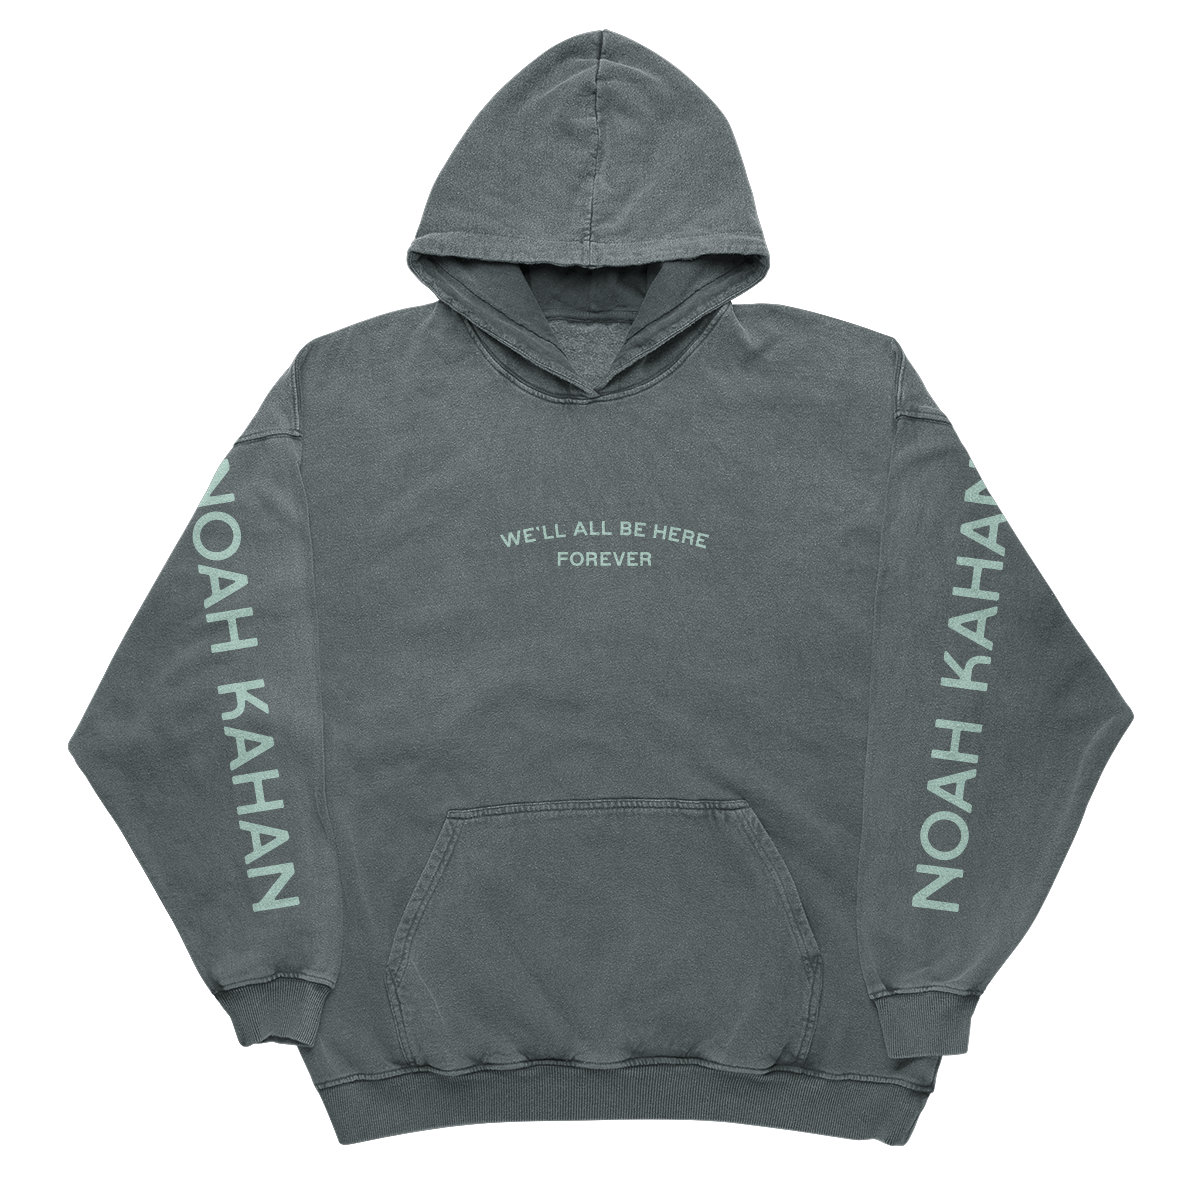 Dark Green Noah Kahan Trails Hoodie with "We'll all be here forever" text embroidery on front and Noah Kahan down each sleeve.